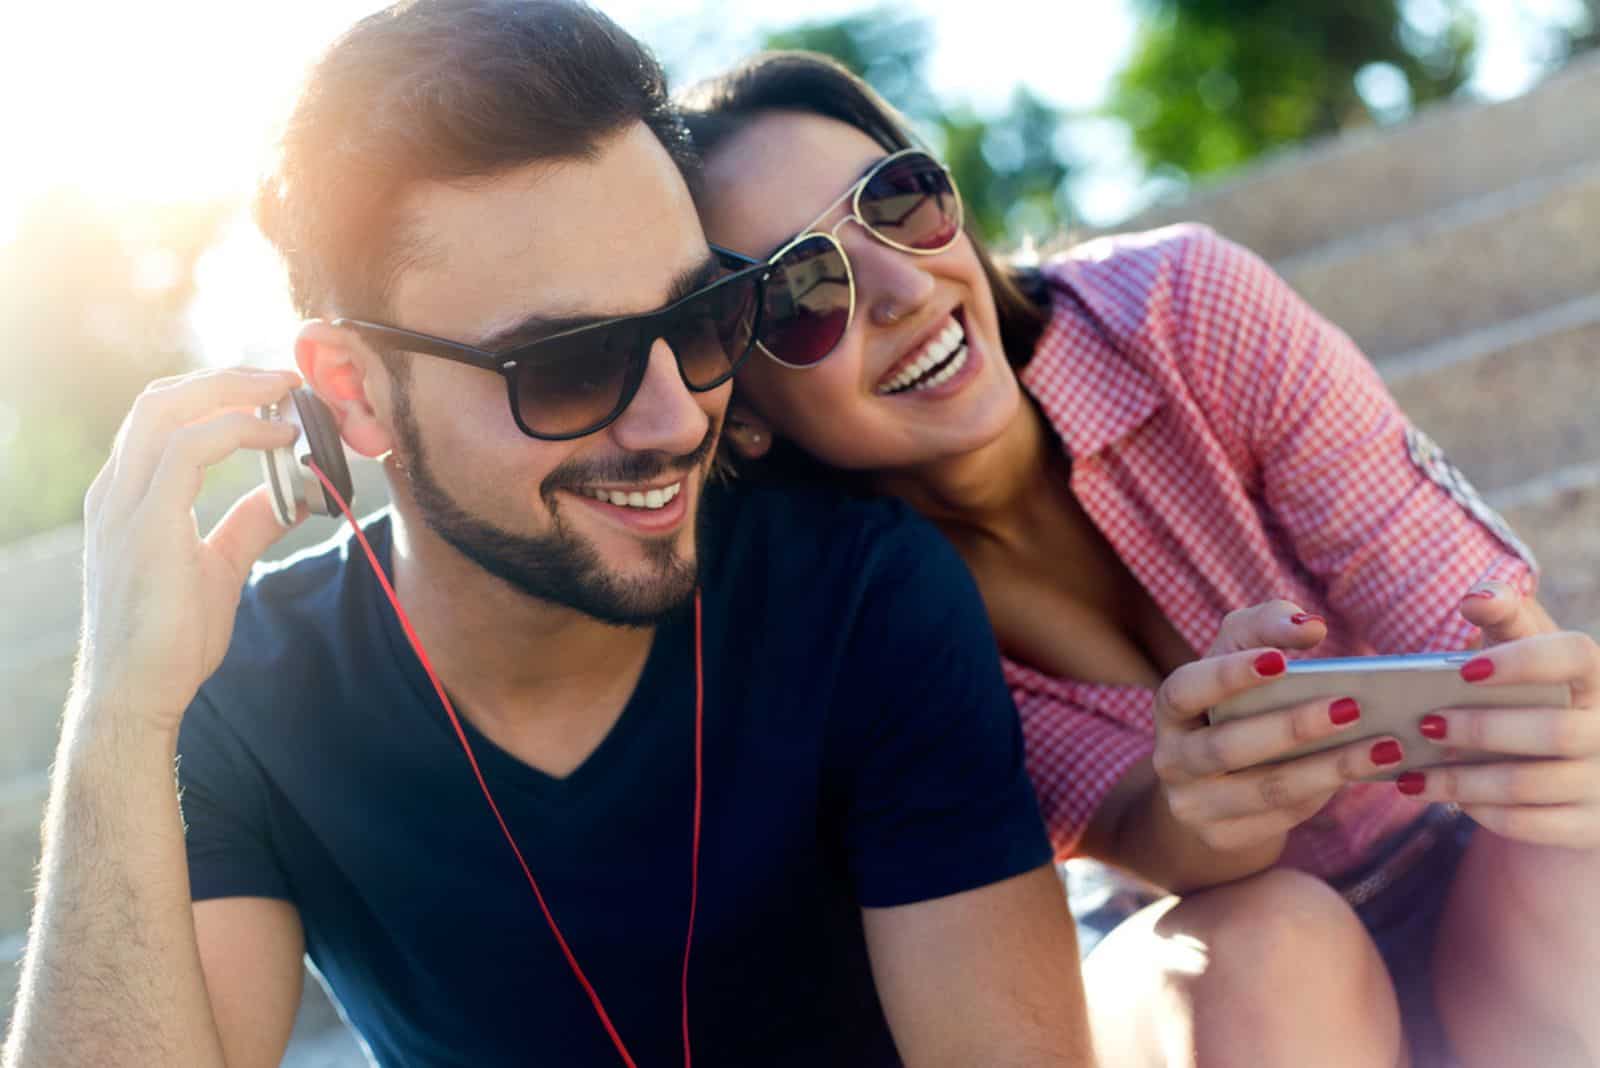 happy couple listening music together